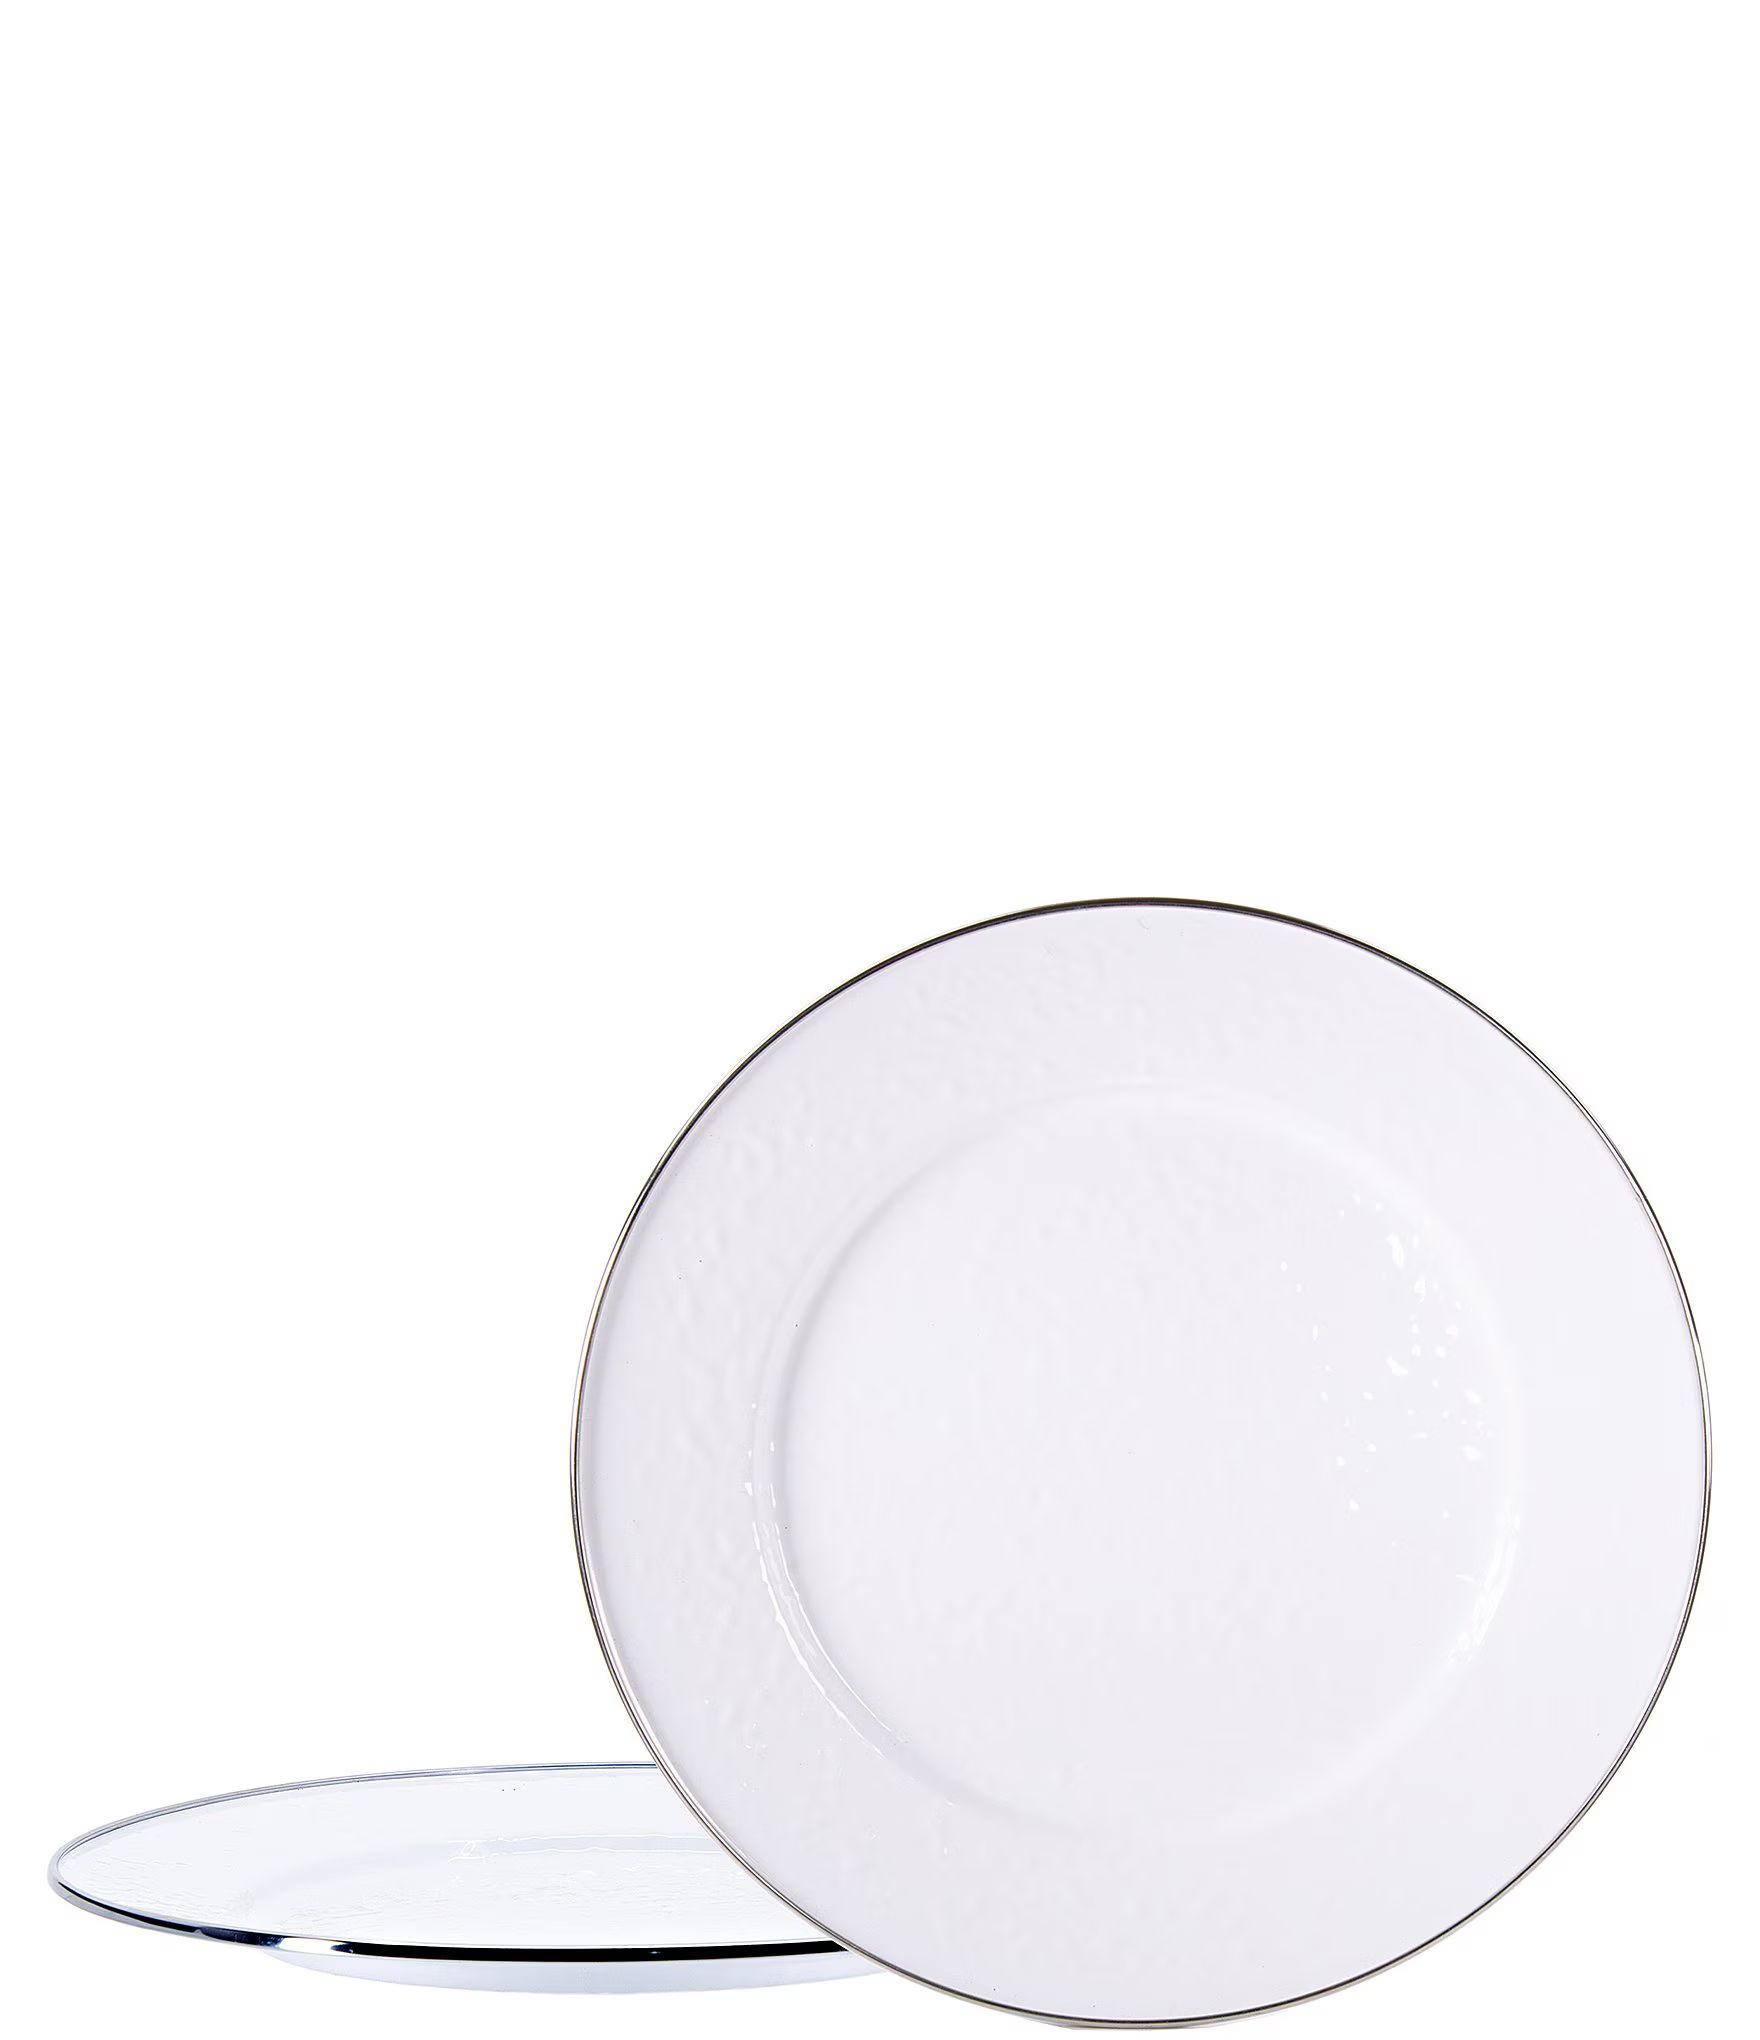 Enamelware Solid Texture White Charger Plates, Set of 2 | Dillard's